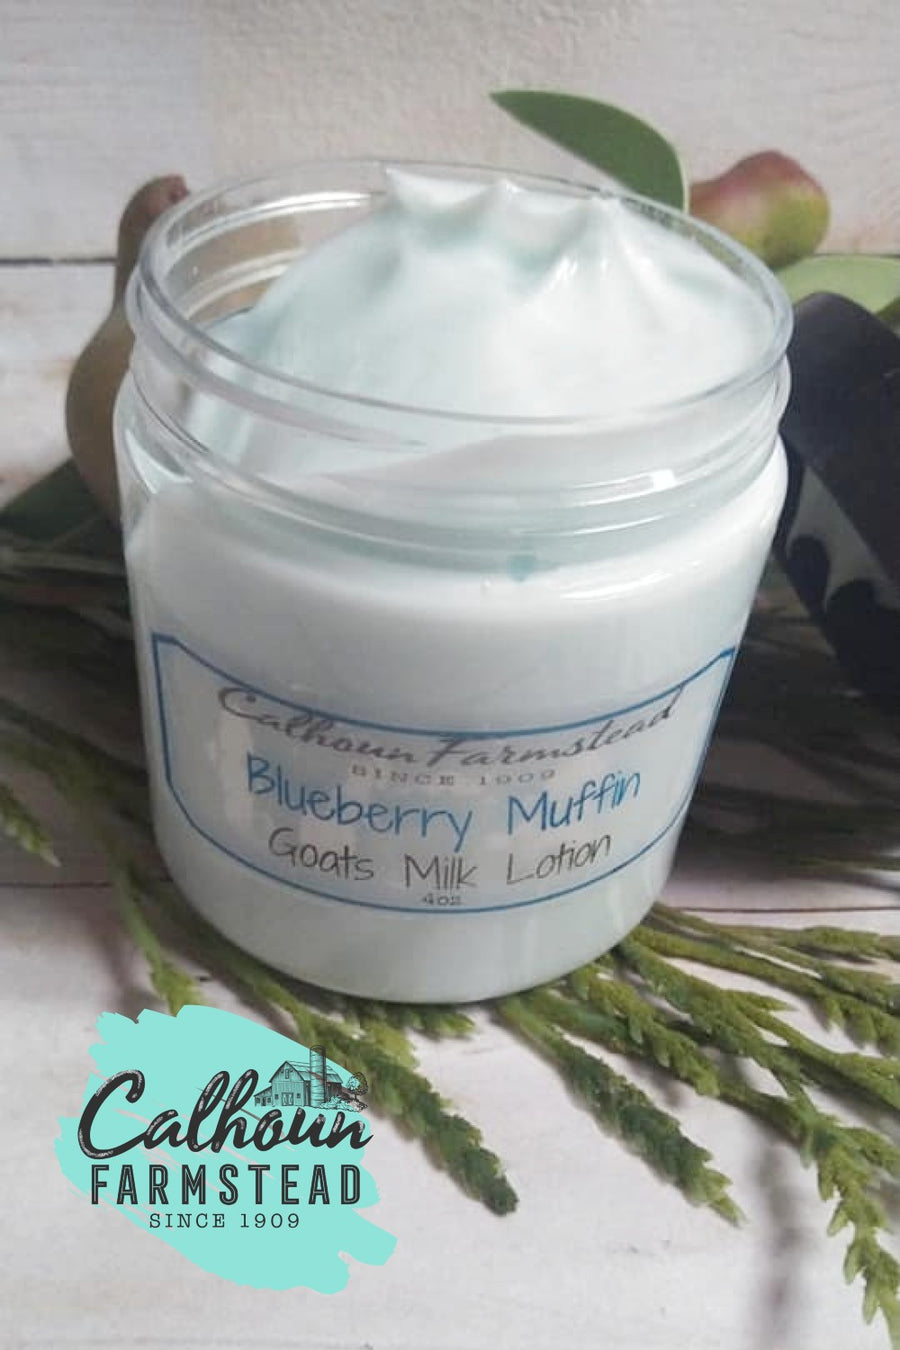 Blueberry muffin scented goats milk lotion. Made by Calhoun Farm with natural ingredients in Falls Creek PA.